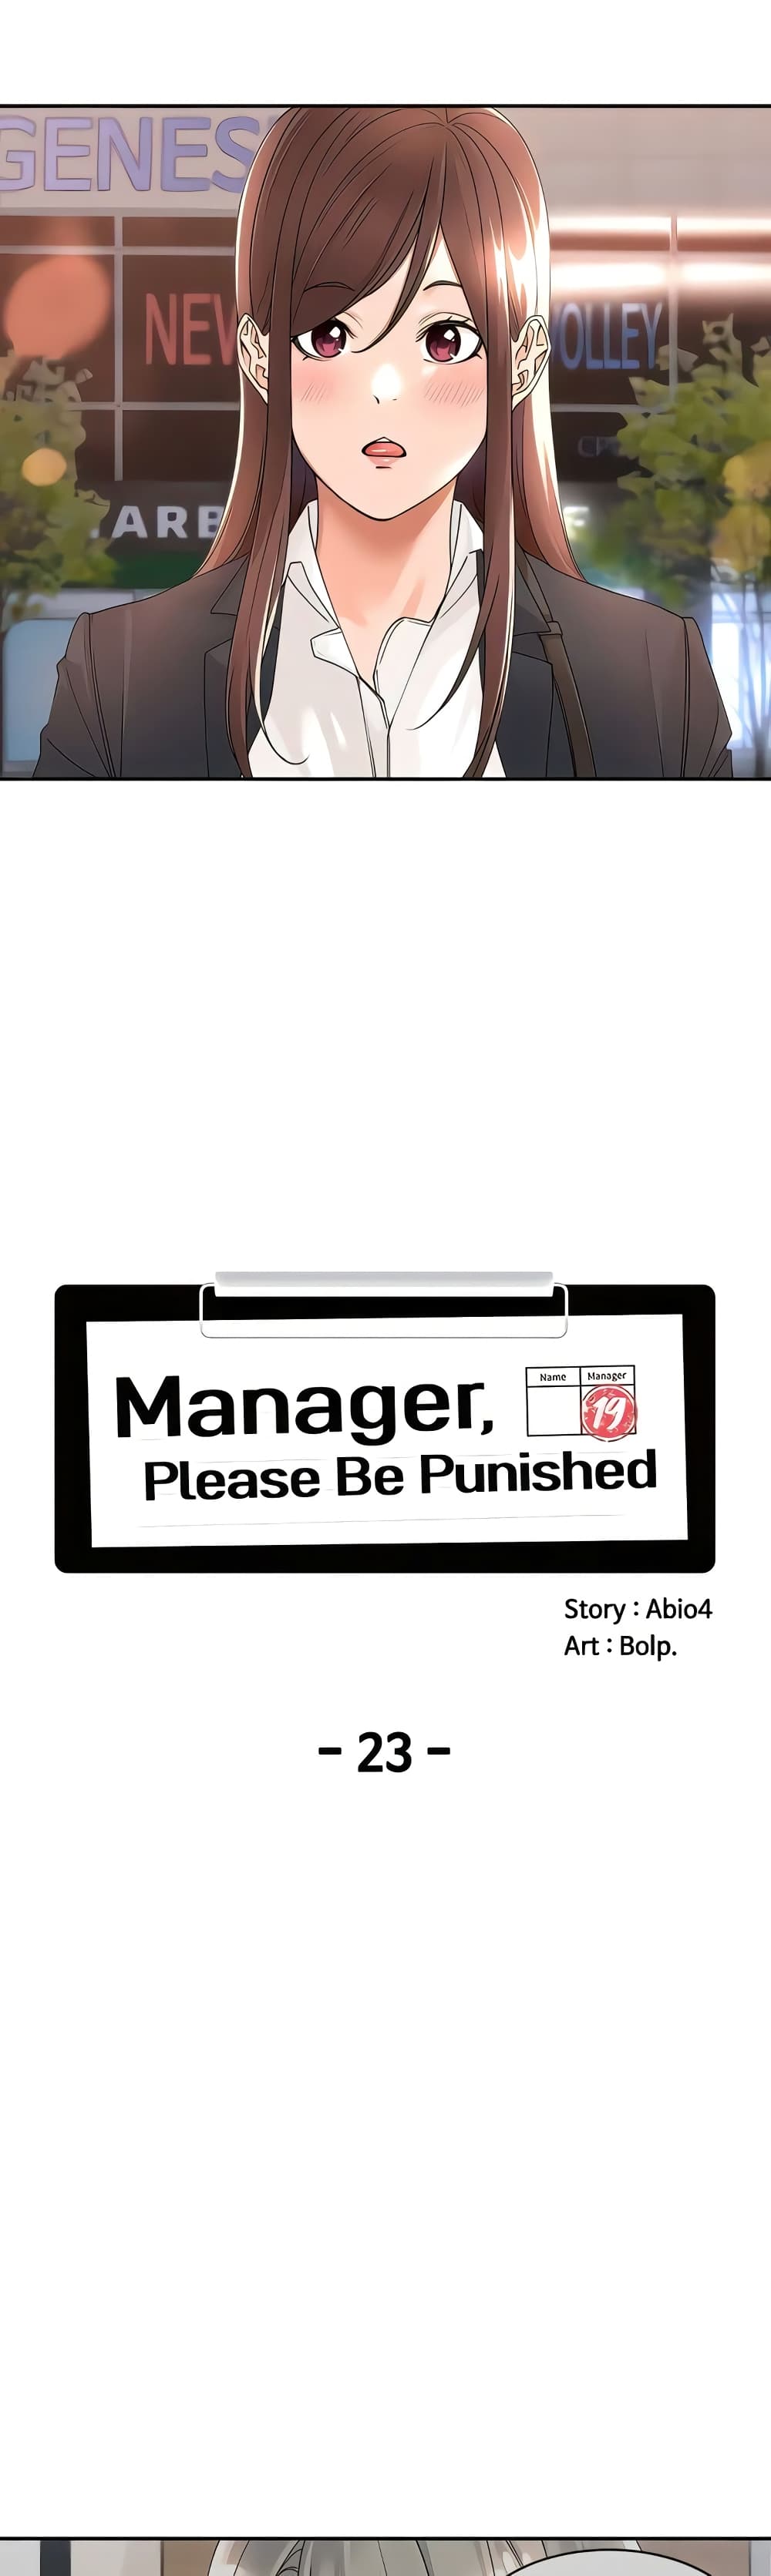 Manager, Please Scold Me 23 (7)